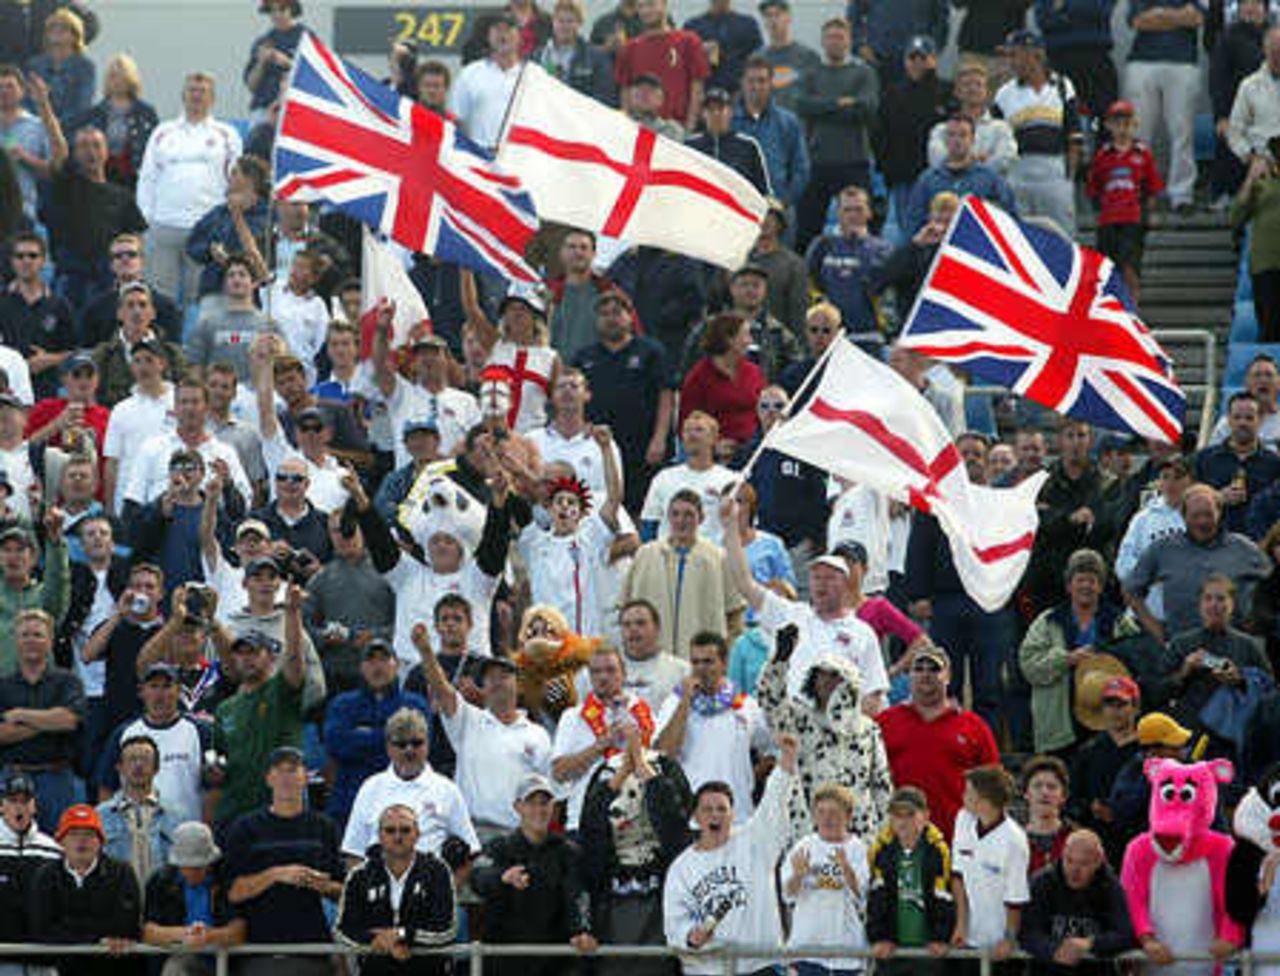 Members of the Barmy Army watch the post-match presentation ceremony from the stands. 3rd Test: New Zealand v England at Eden Park, Auckland, 30 March-3 April 2002 (3 April 2002).